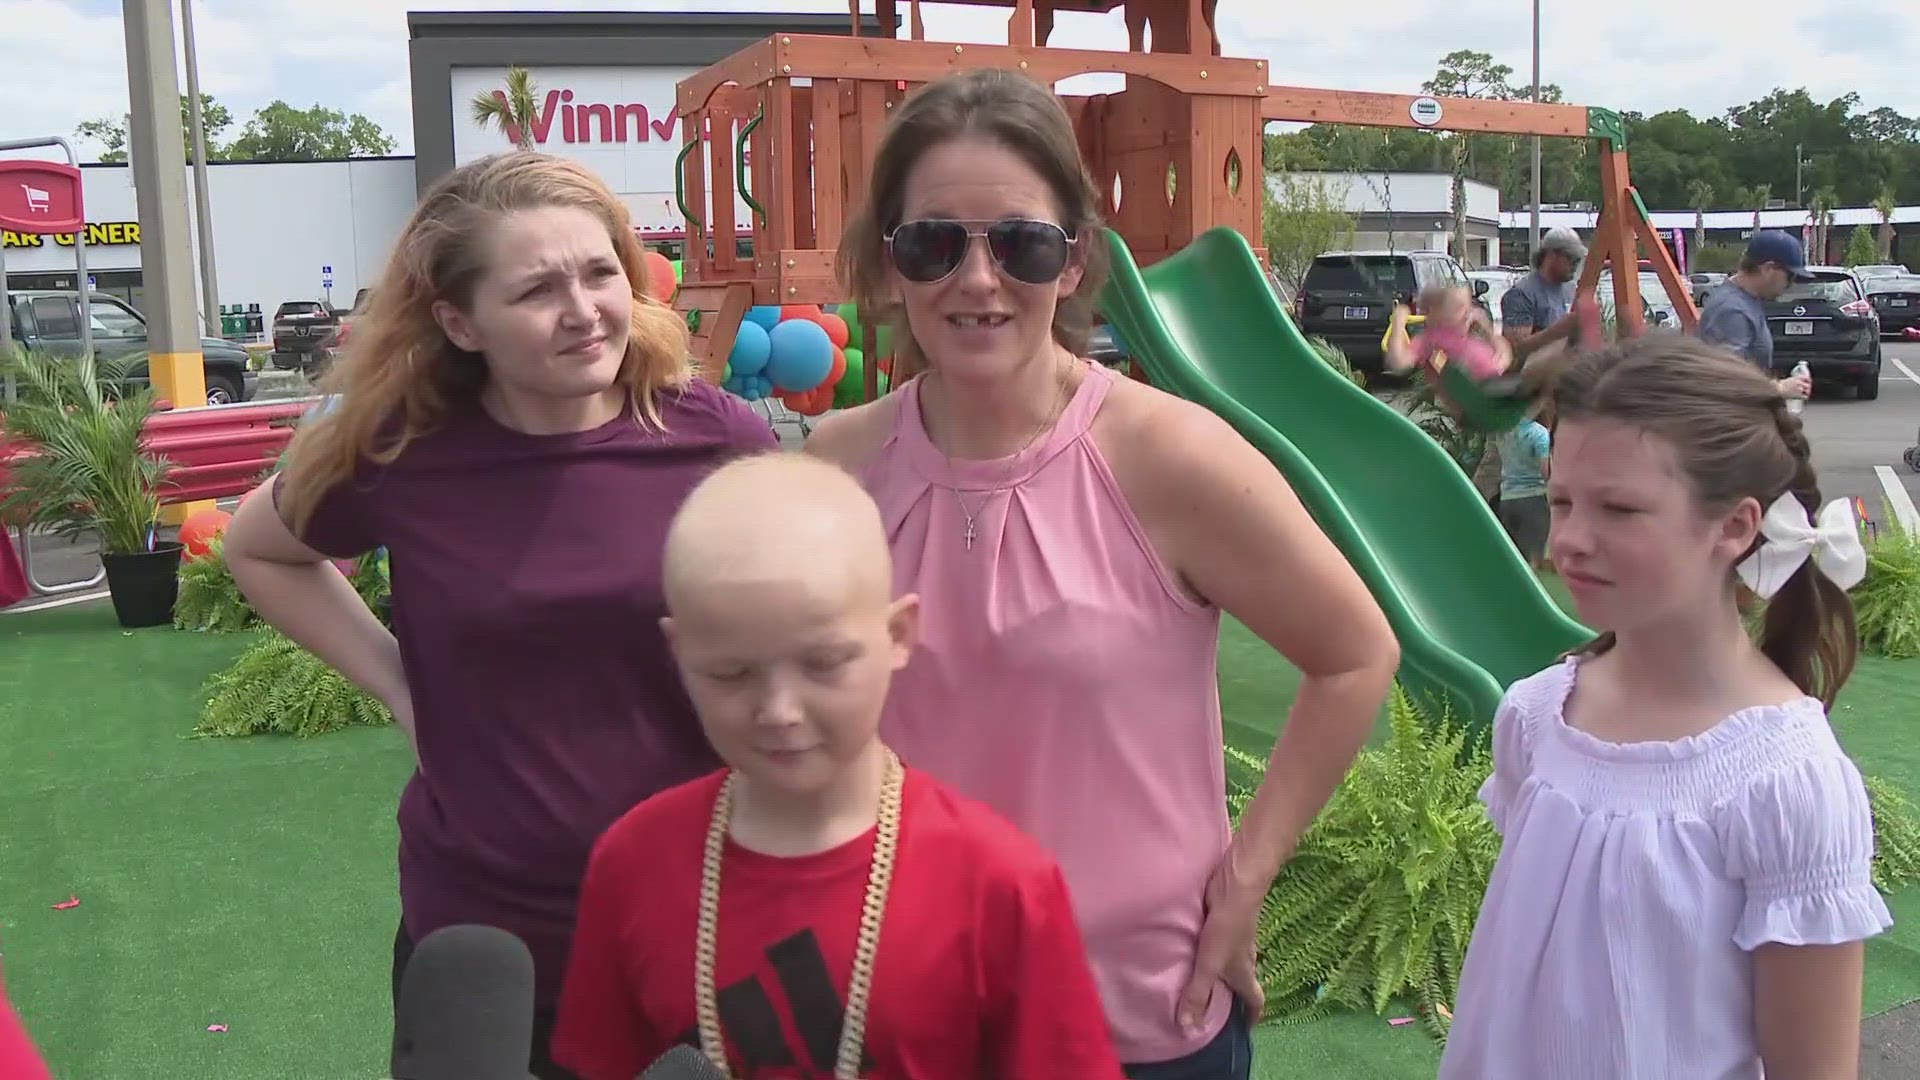 Winn-Dixie partnered with the Roc Solid Foundation to build the playset for 9-year-old Talmadge who is fighting cancer at Wolfson Children's Hospital.